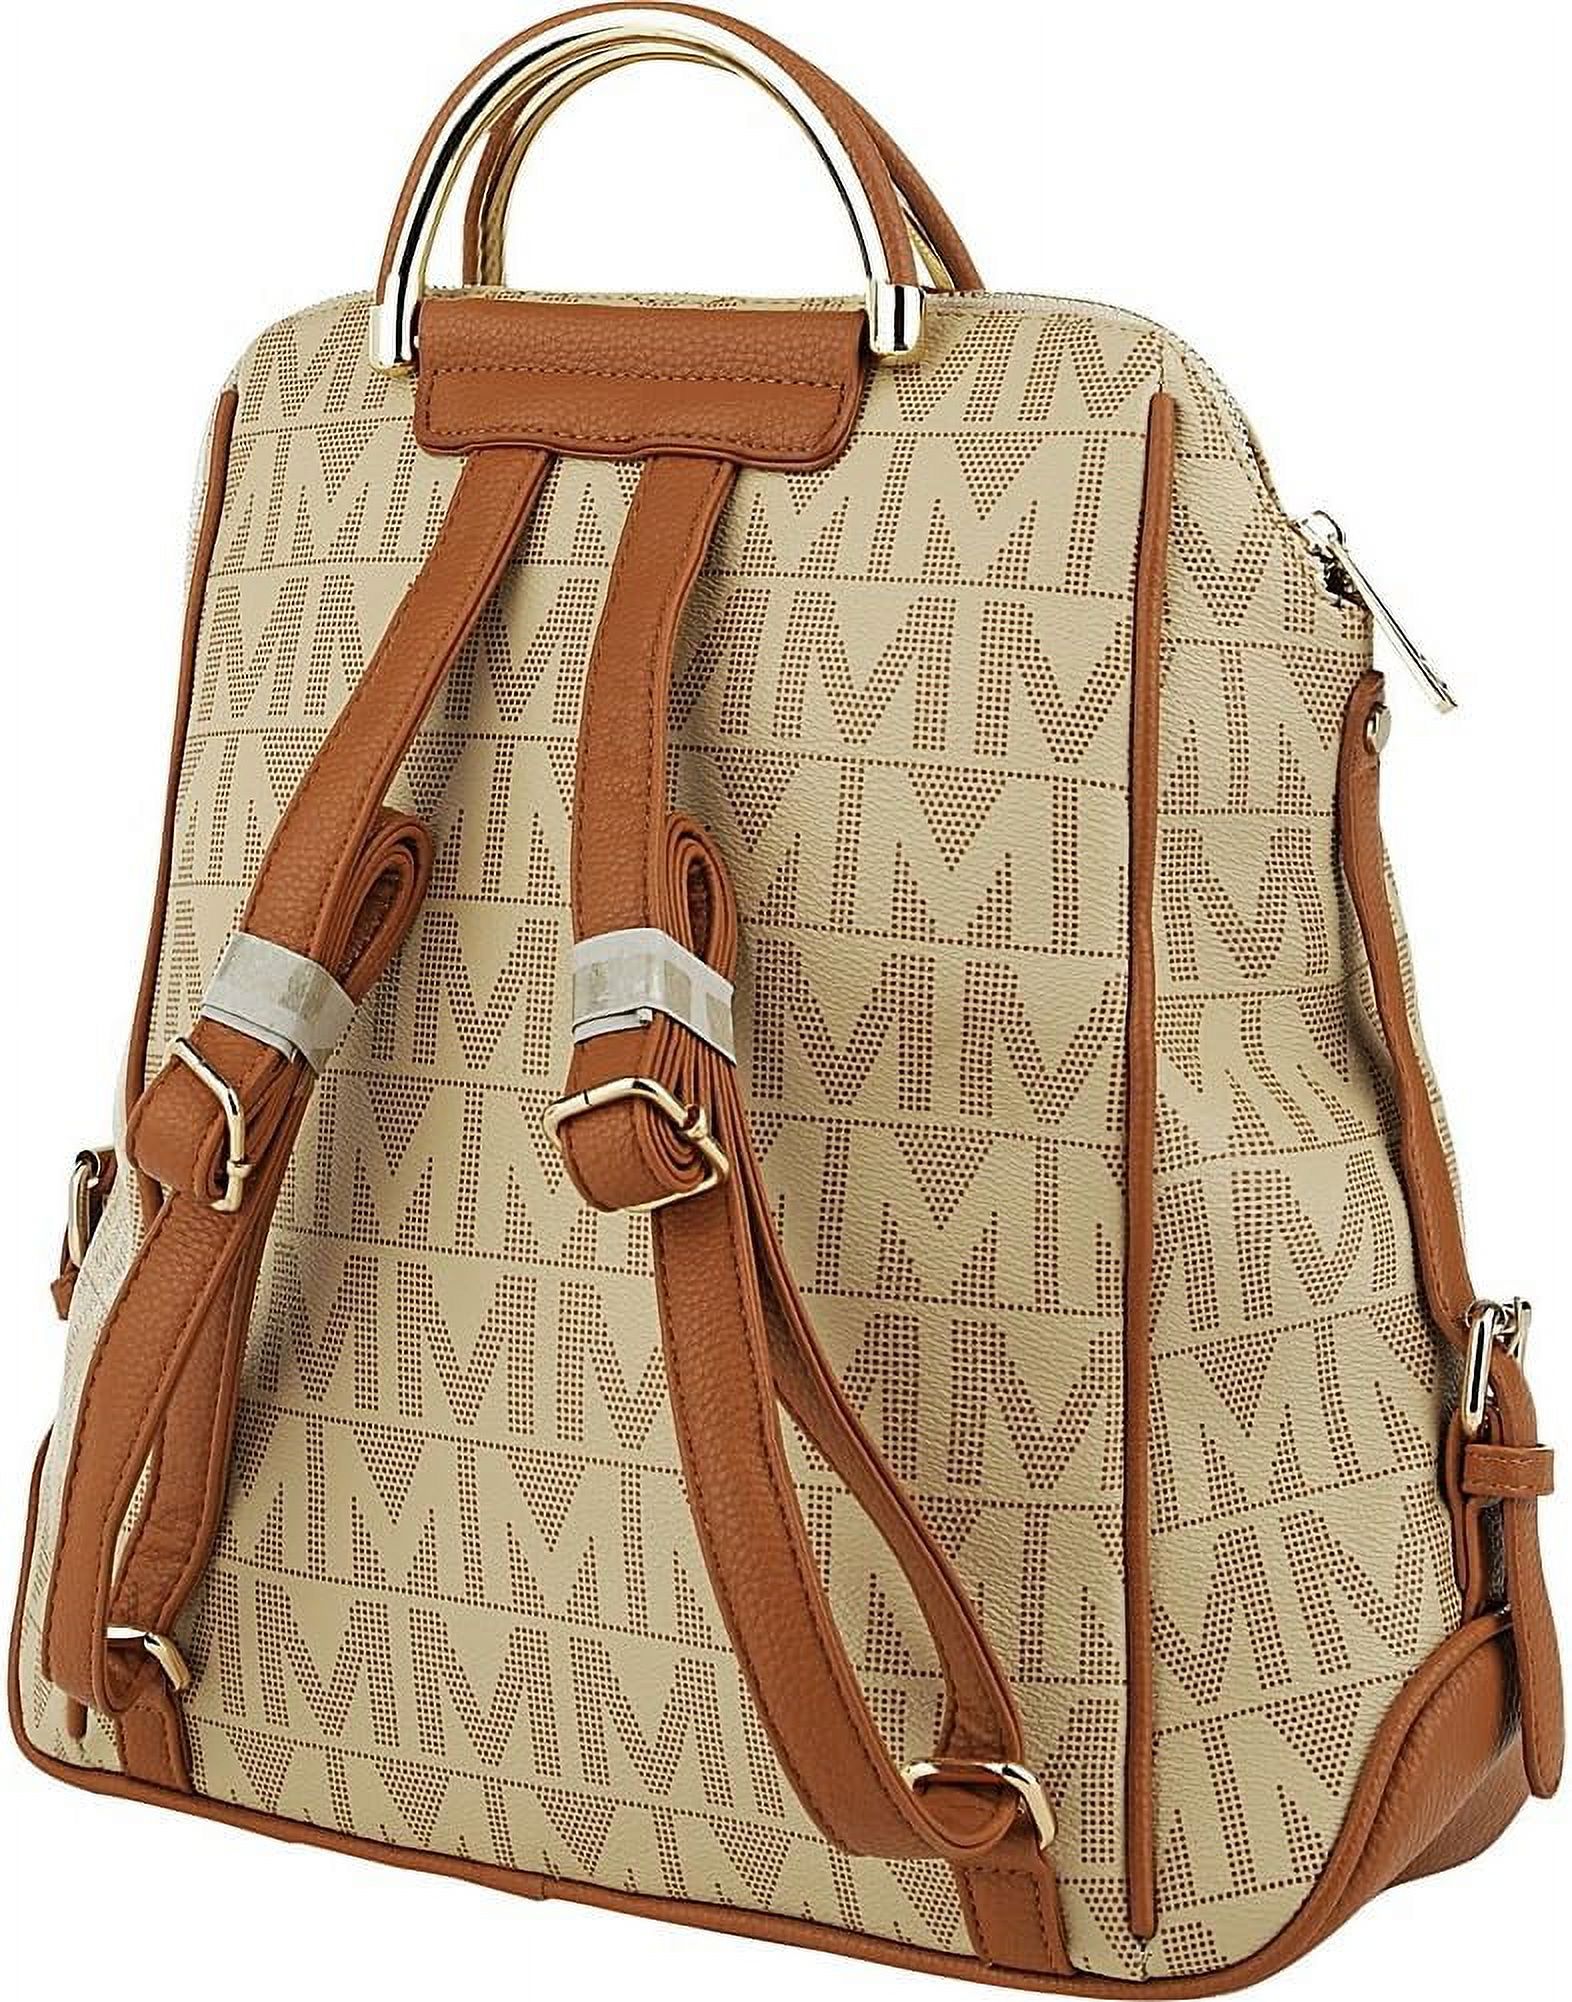 MKF Collection Cora Women's Backpack, Stylish Bookbag Purse by Mia K - Chocolate - image 4 of 6